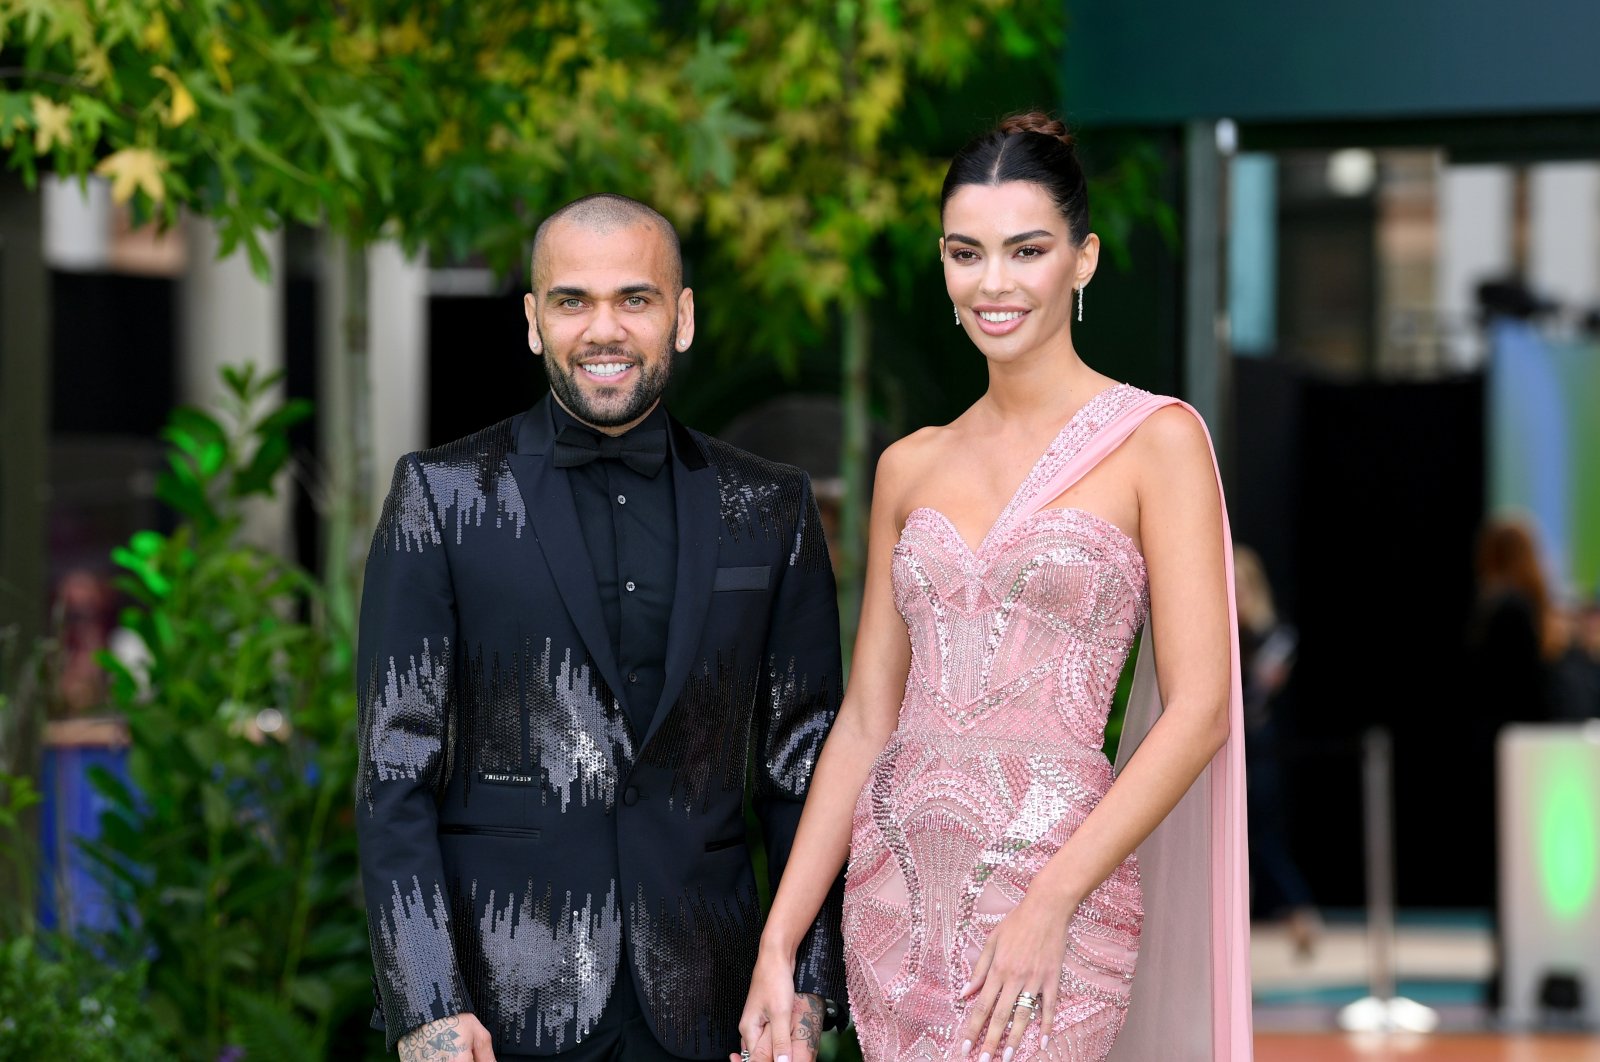 Dani Alves and Joana Sanz attend the Earthshot Prize 2021 at Alexandra Palace, London, England, Oct. 17, 2021. (Getty Images Photo)